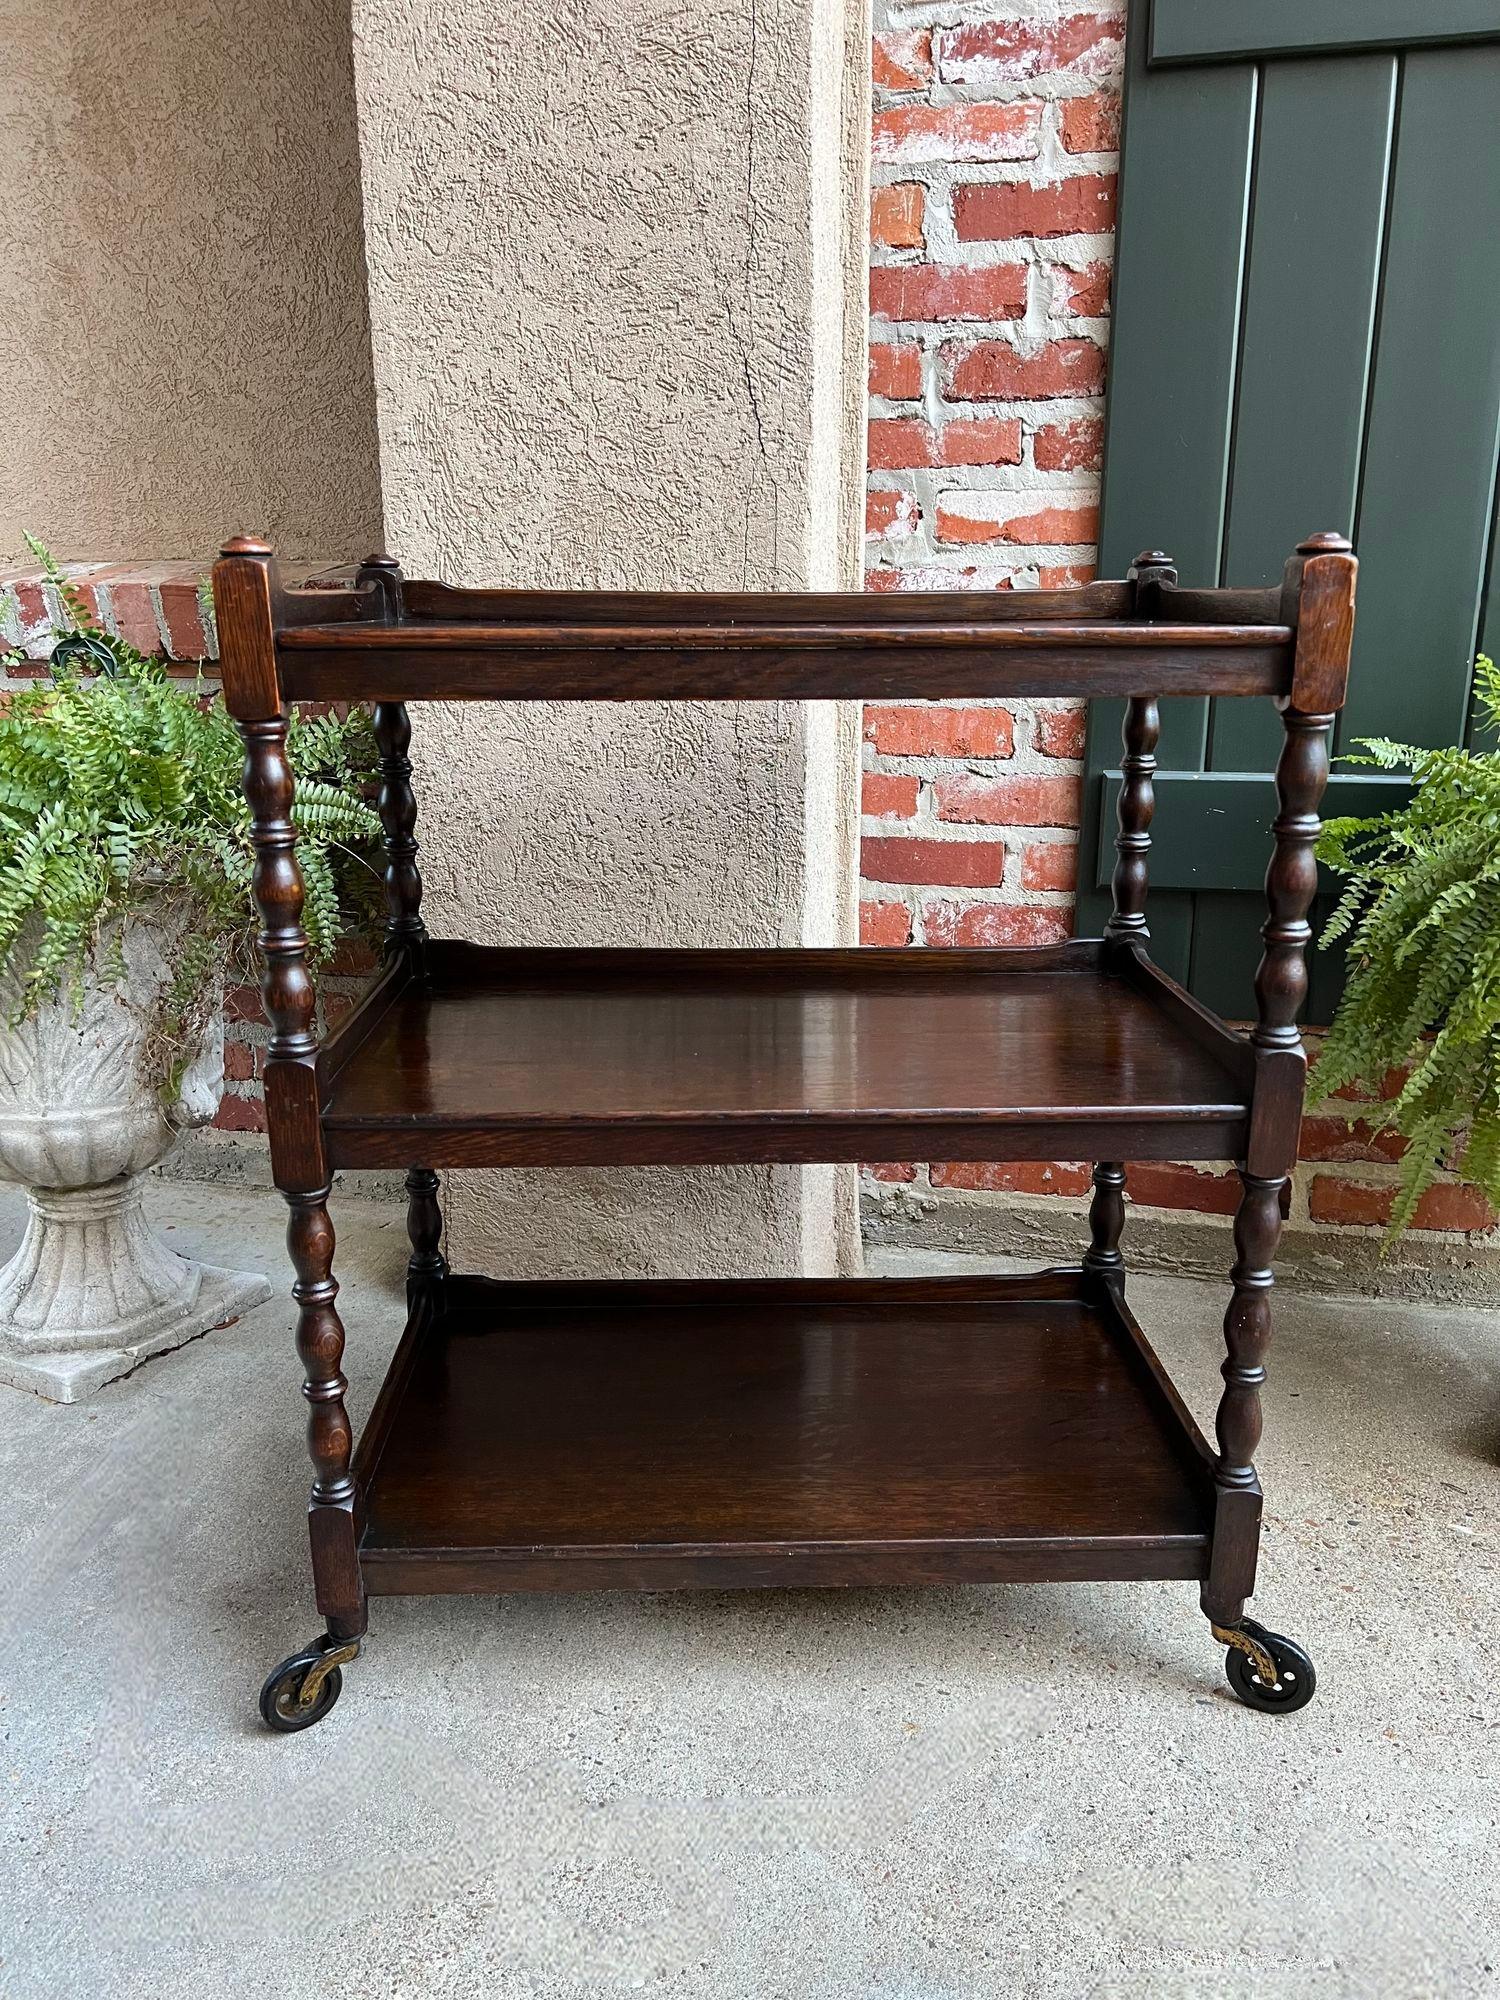 Antique English Oak Tea Trolley Wine Bar Serving Cart 3 Tier British Dumbwaiter.

Direct from England, a beautiful antique English oak tea trolley or “dumbwaiter” serving cart. Excellent for entertaining and great for use as a side table or sofa